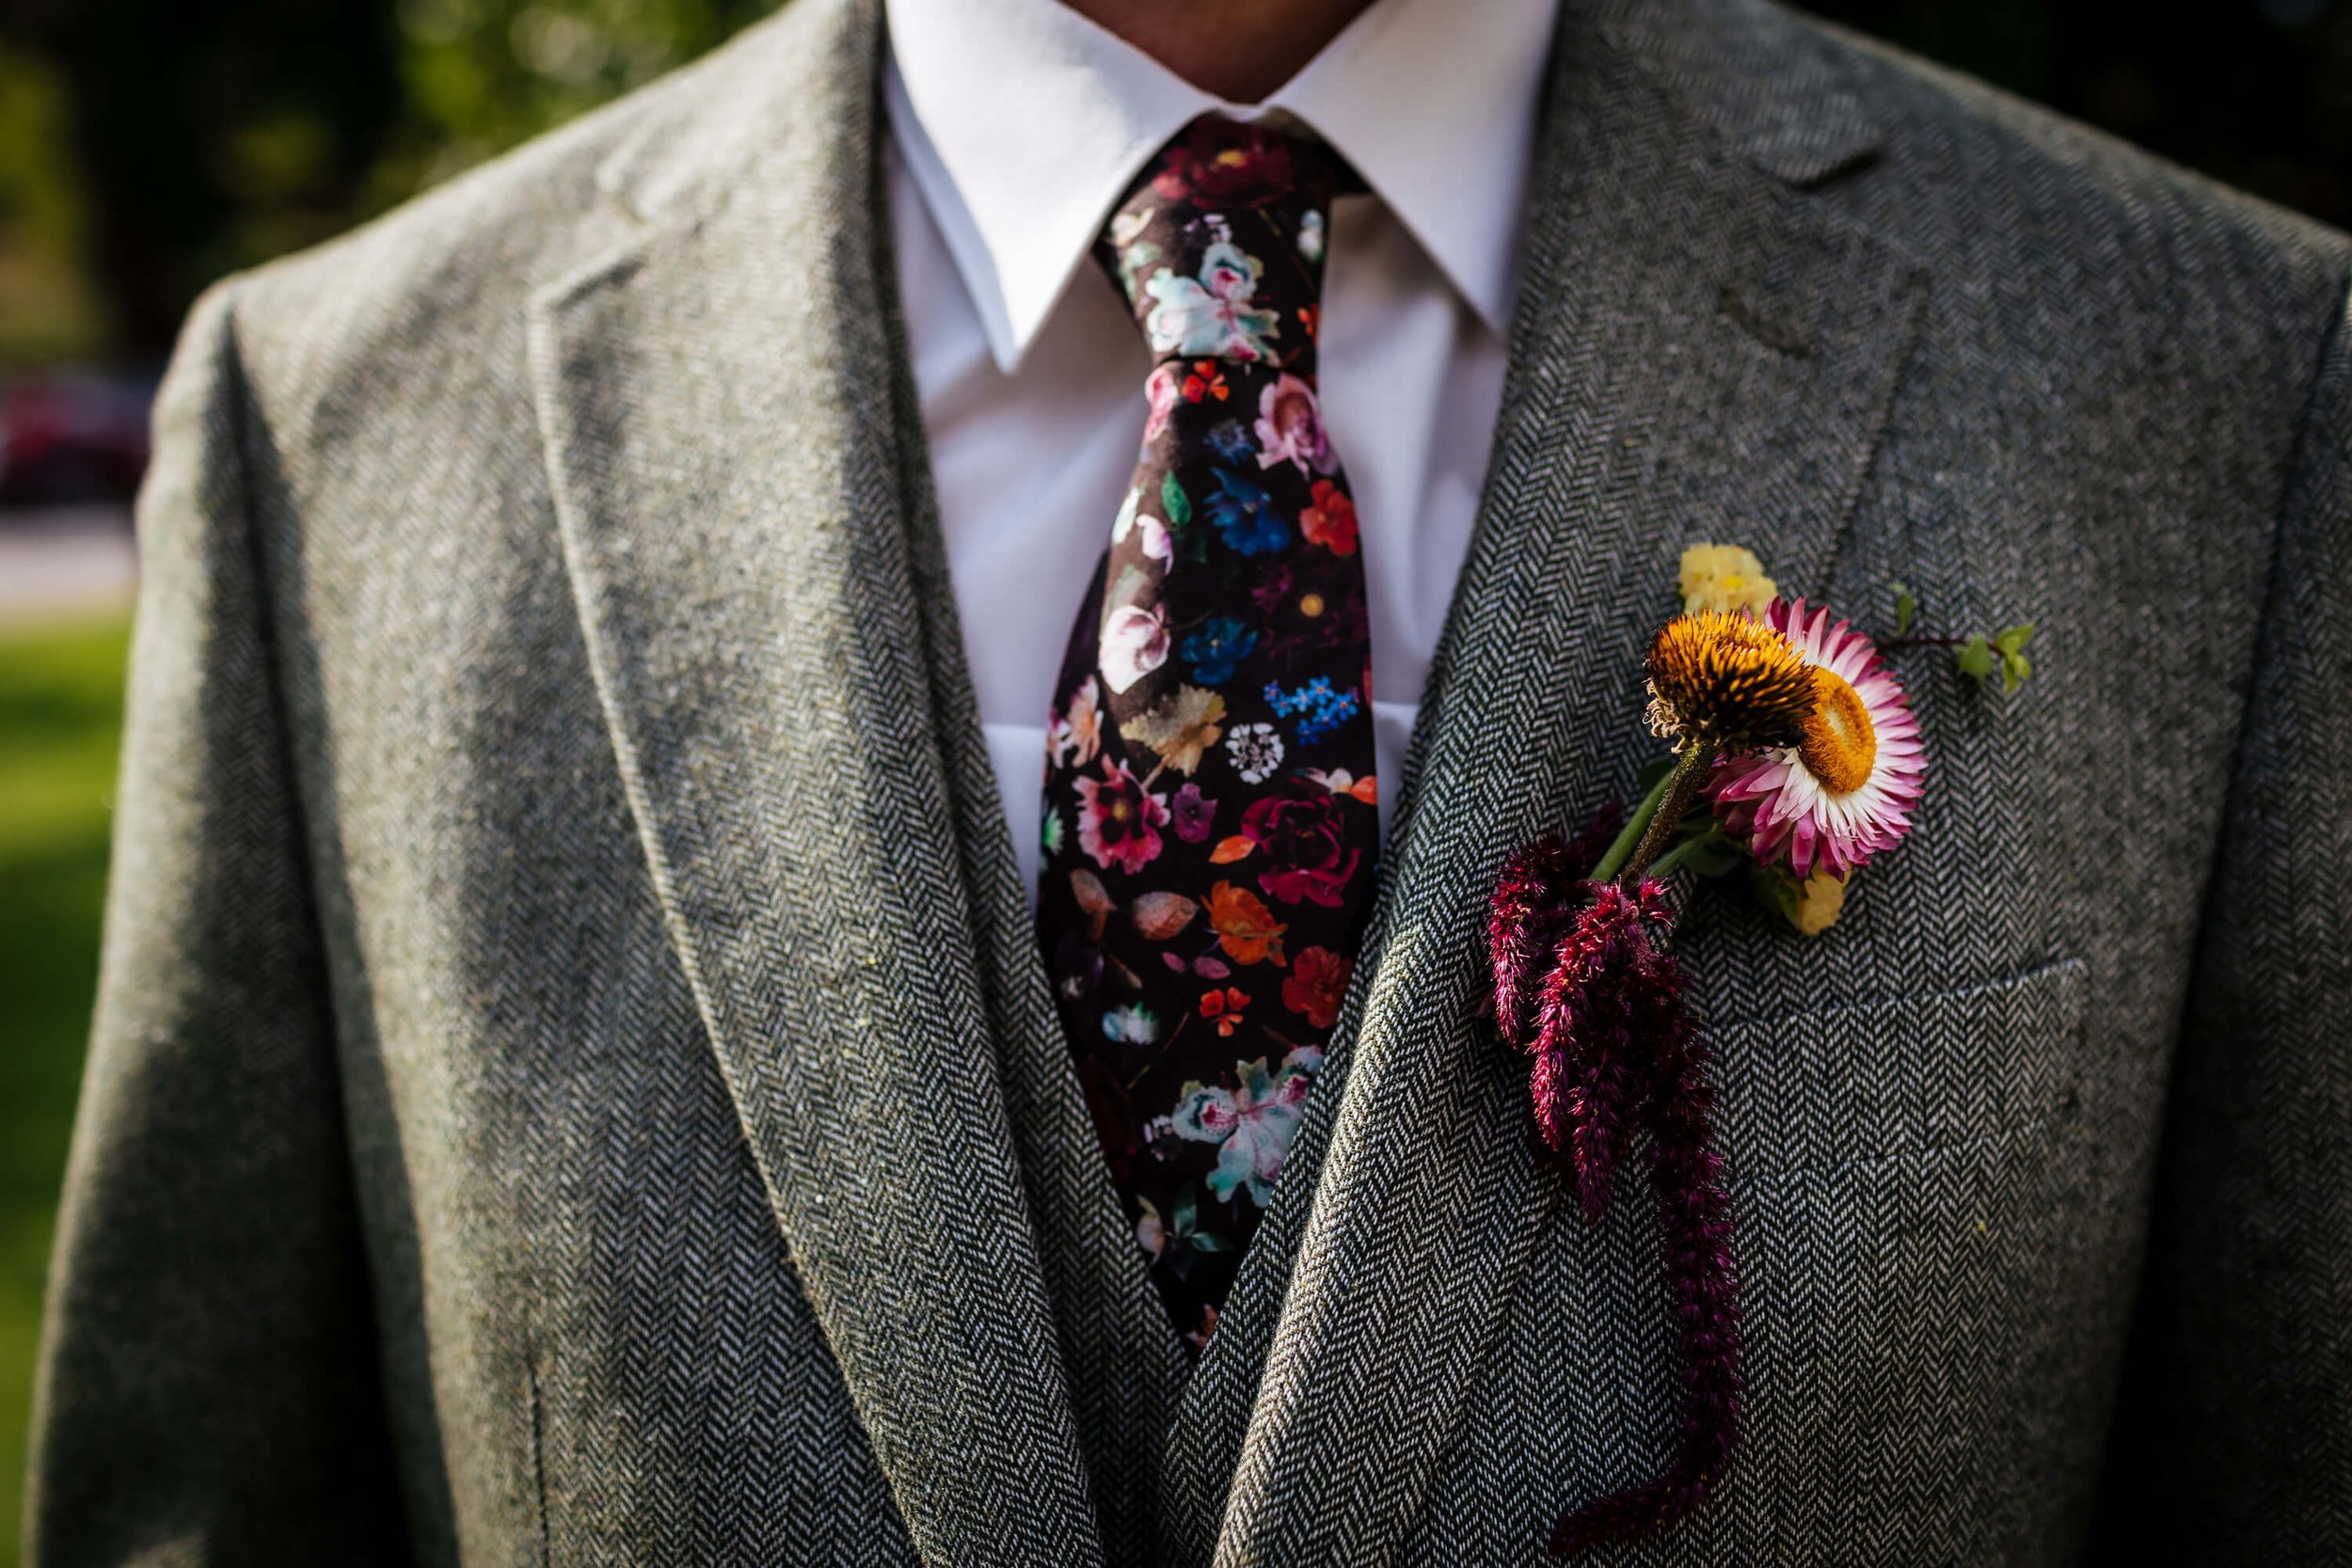 The groom's tie and buttonhole ready for a wedding